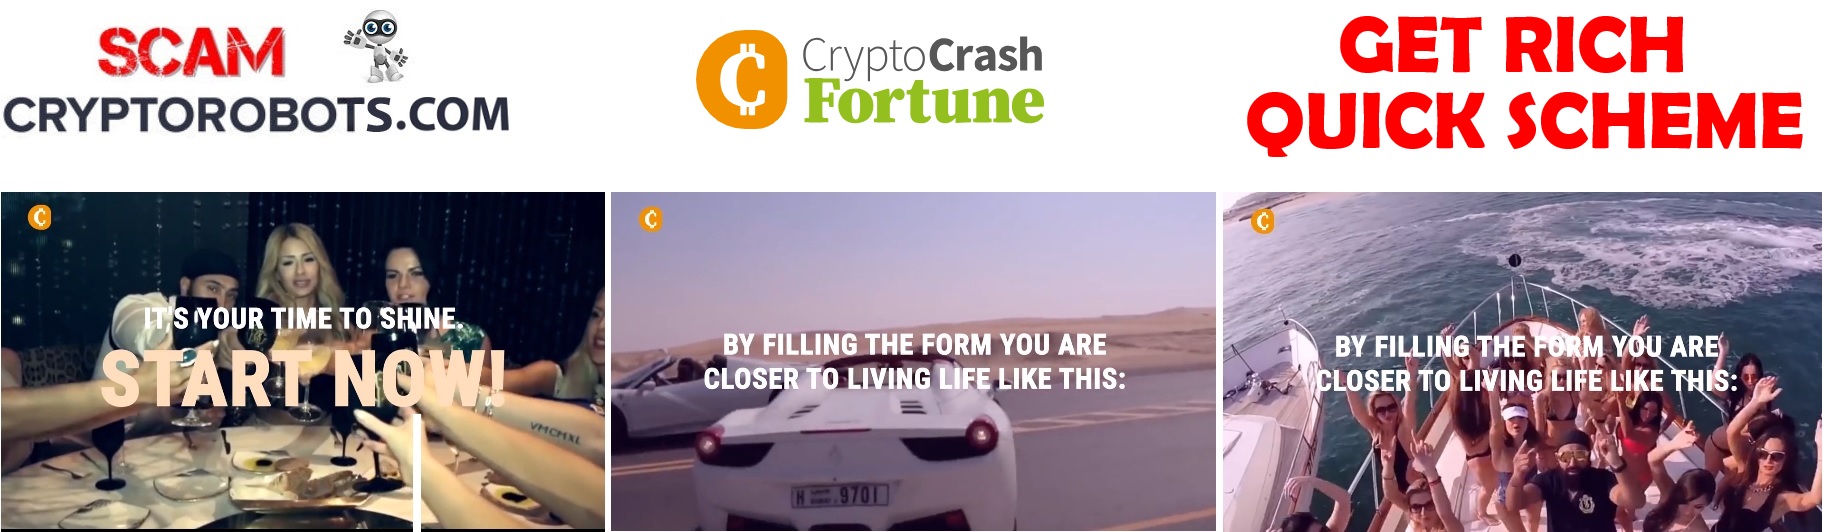 Crypto Crash Fortune Review. Scam App Exposed With Proof!